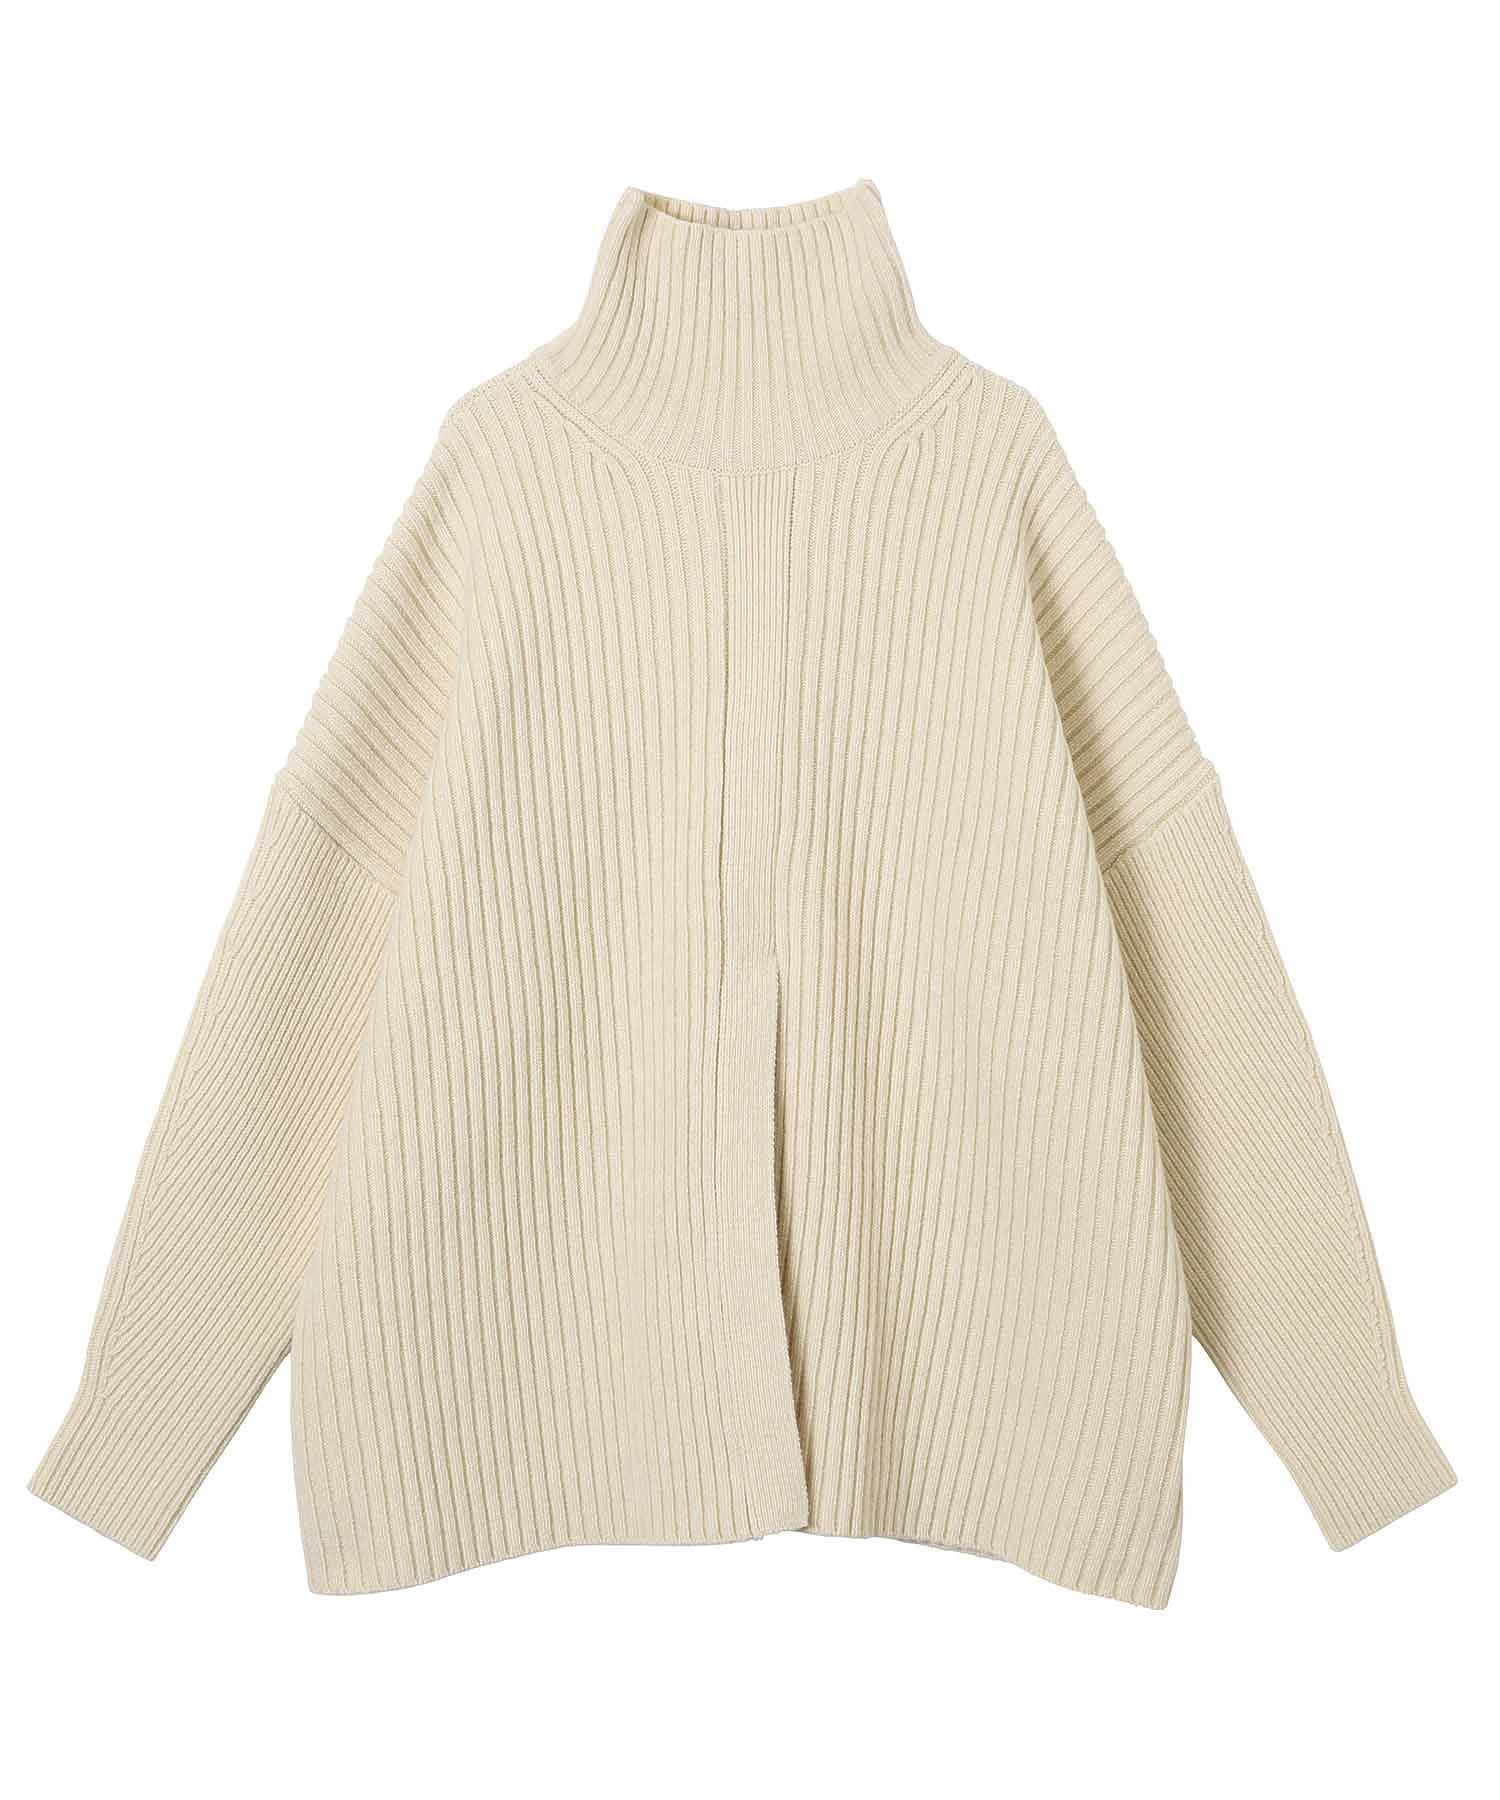 CLANE/クラネ/ DOUBLE FACE CENTER SLIT RIB KNIT TOPS 13106-2332